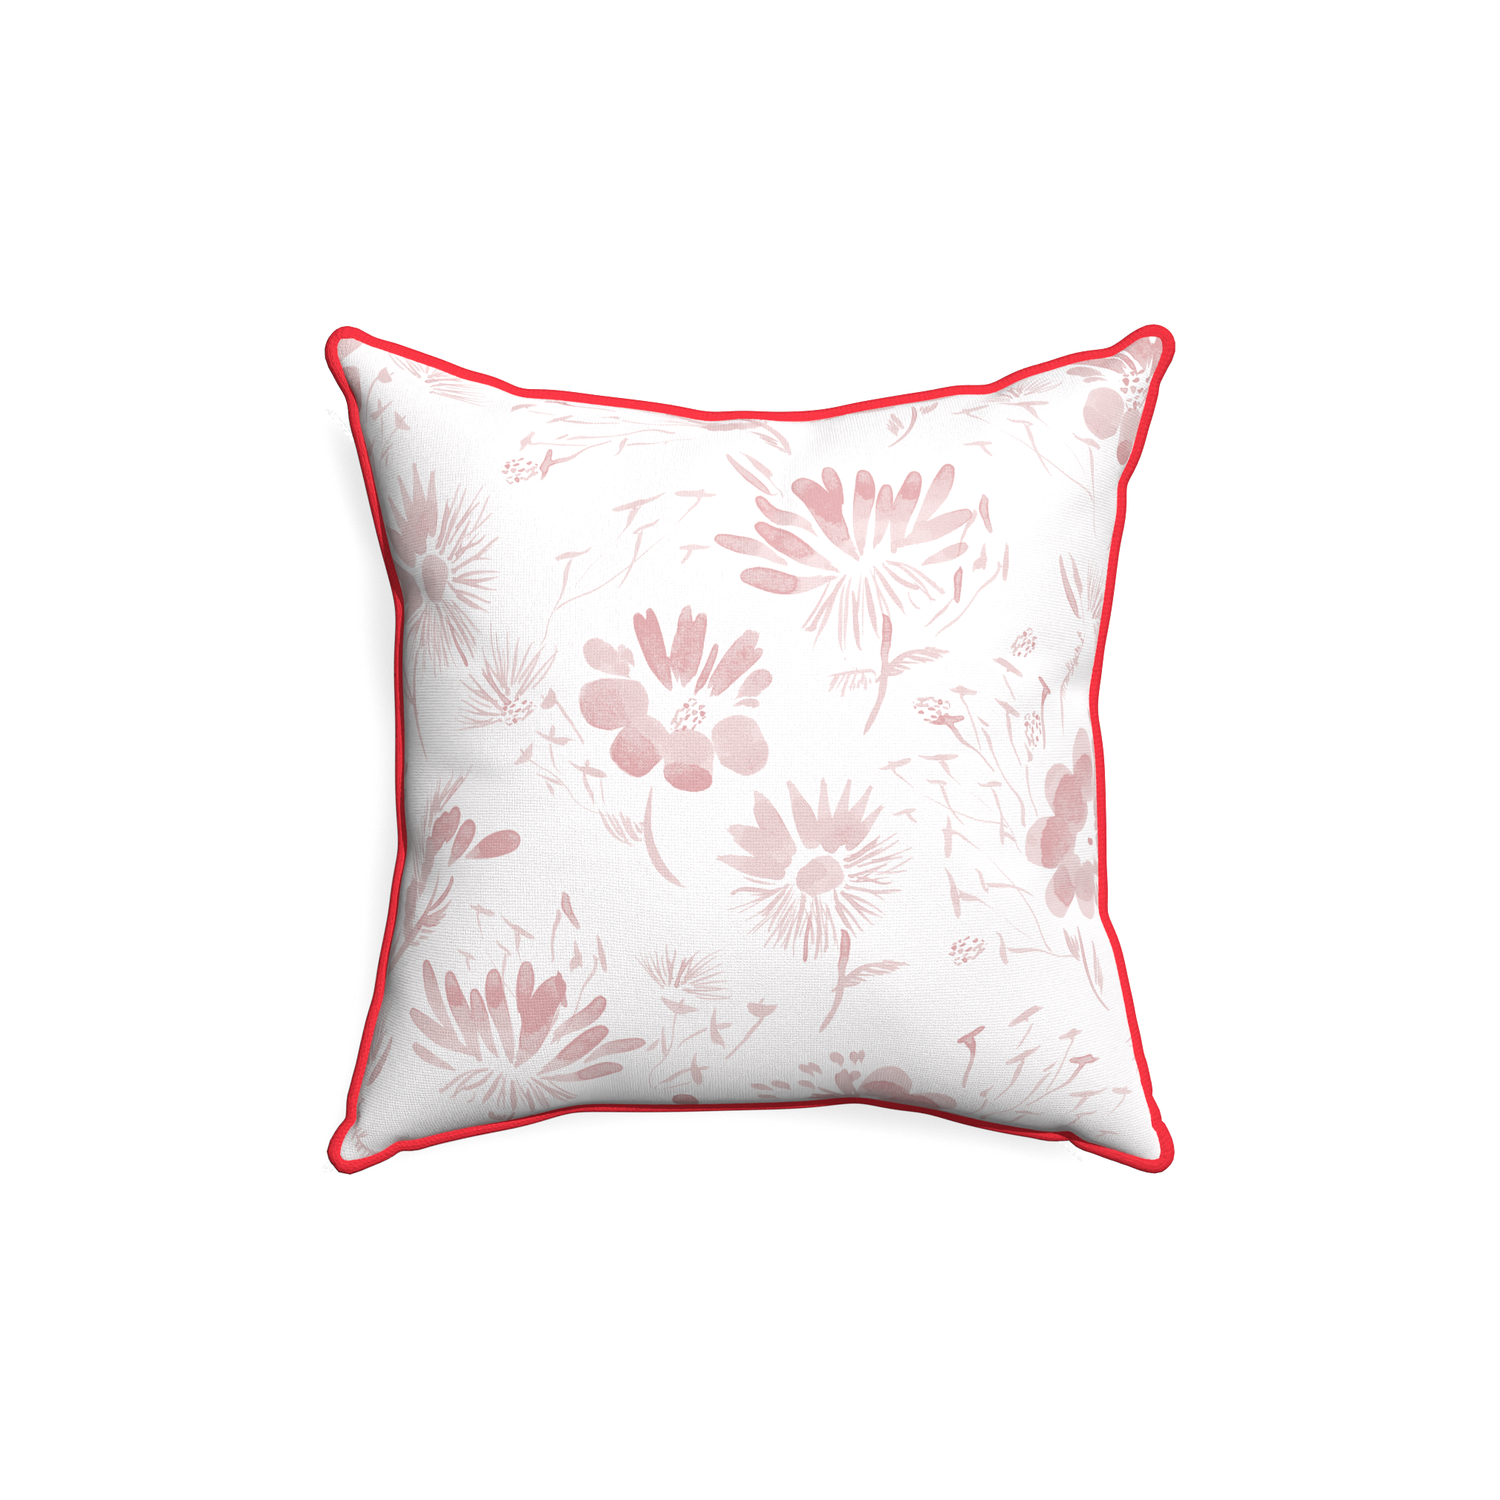 18-square blake custom pink floralpillow with cherry piping on white background